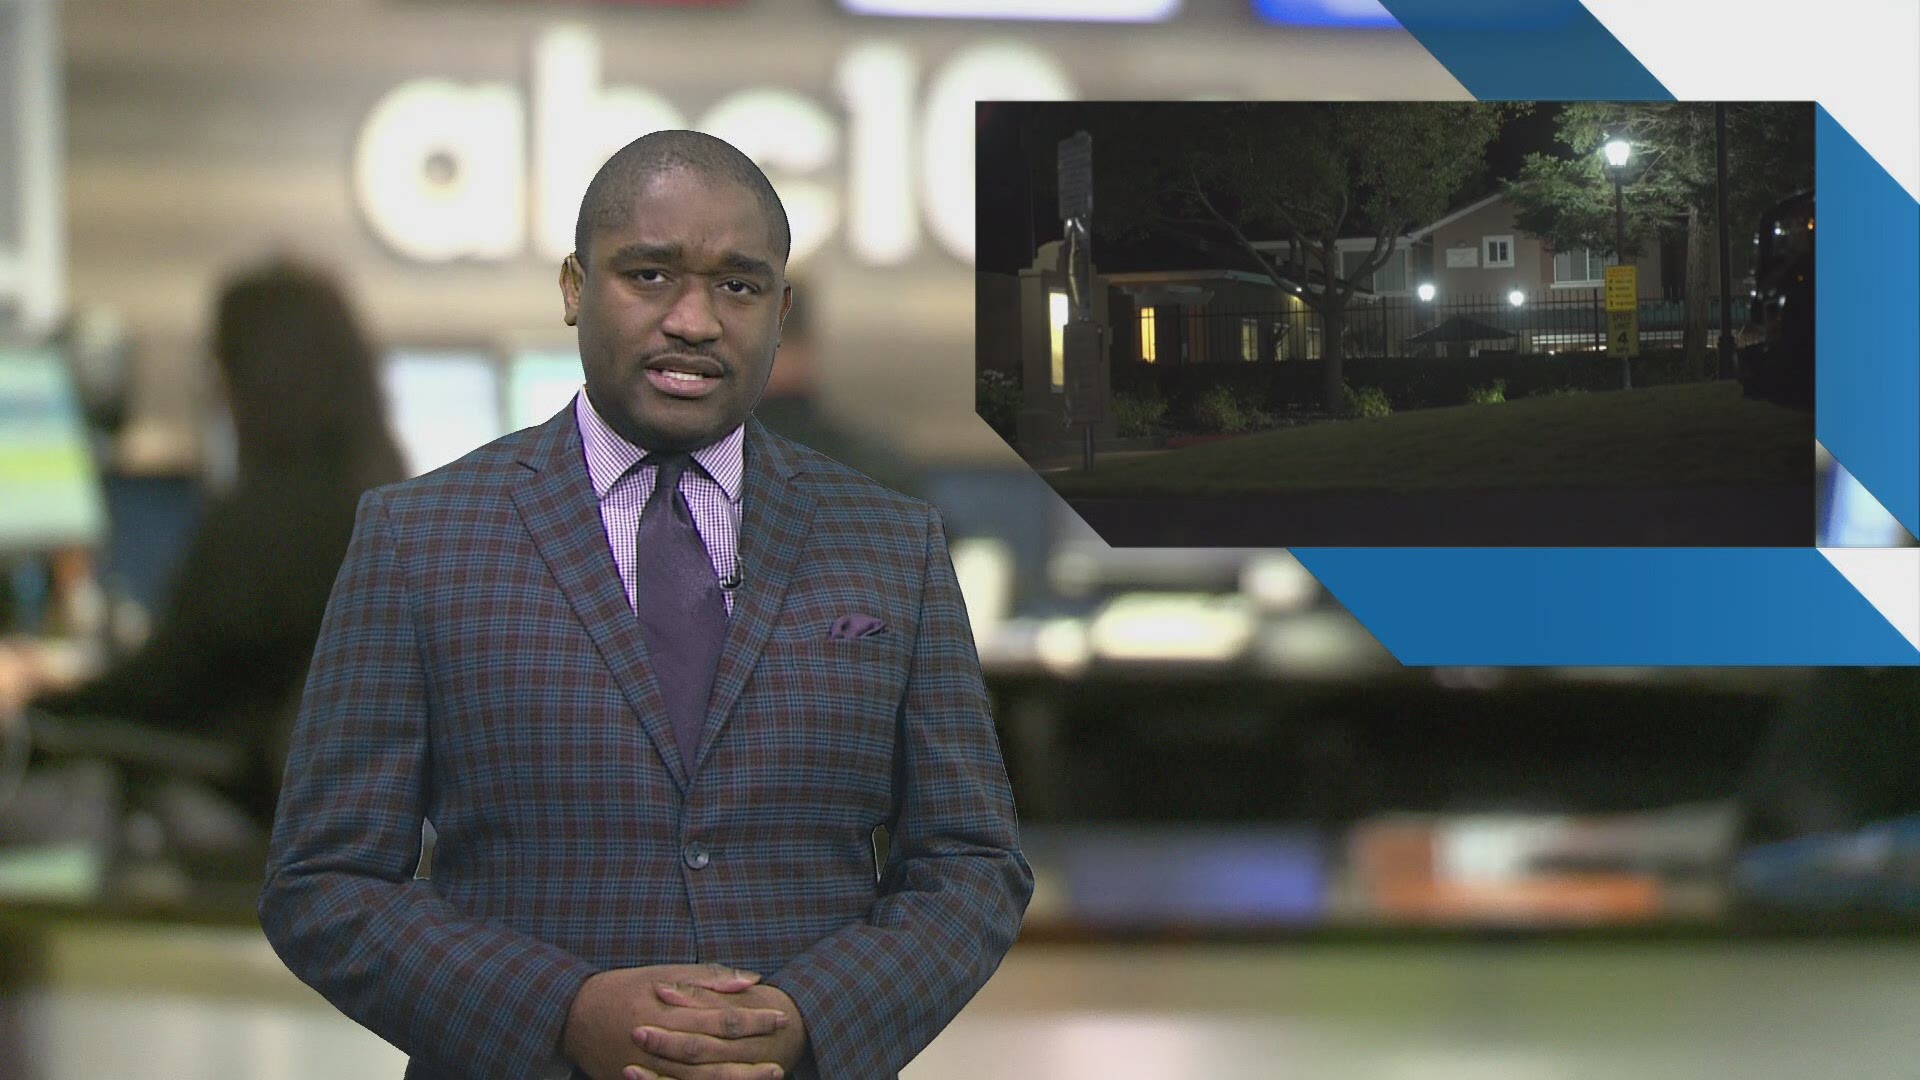 Evening Headlines: October 15, 2019 | Catch in-depth reporting on #LateNewsTonight at 11 p.m. | The latest Sacramento news is always at www.abc10.com